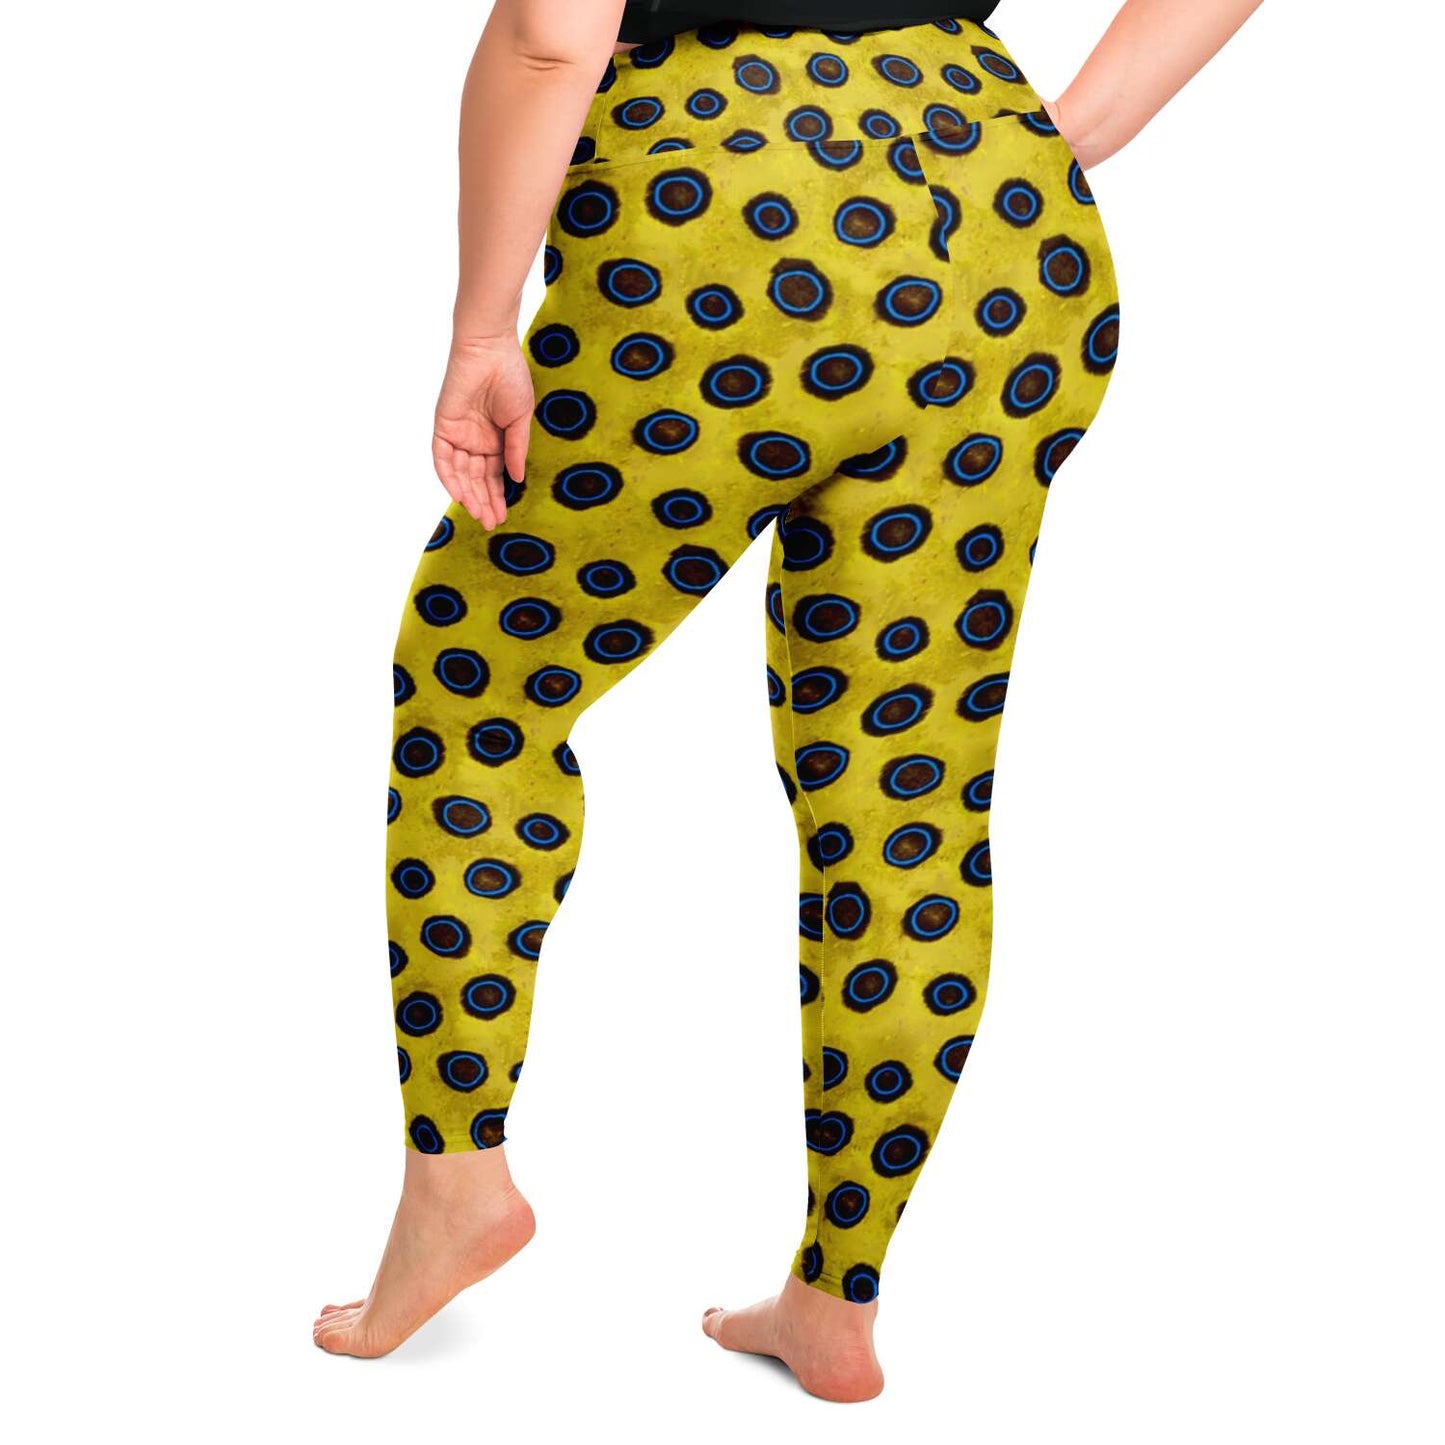 Blue-ringed octopus leggings - plus size on model with side back view for scuba diving and yoga